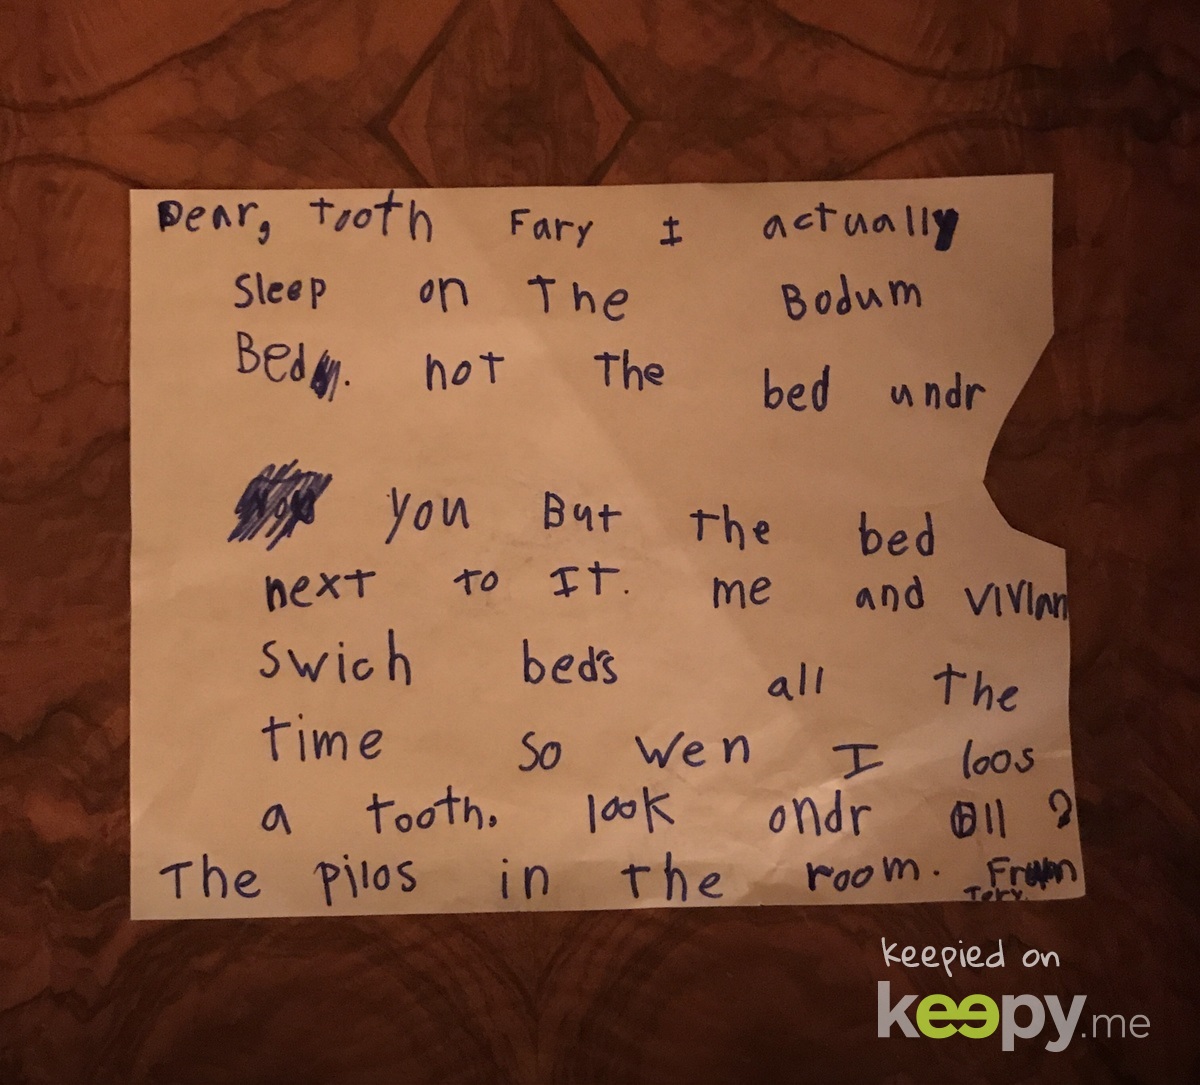 Even the tooth fairy  » Keepy.me